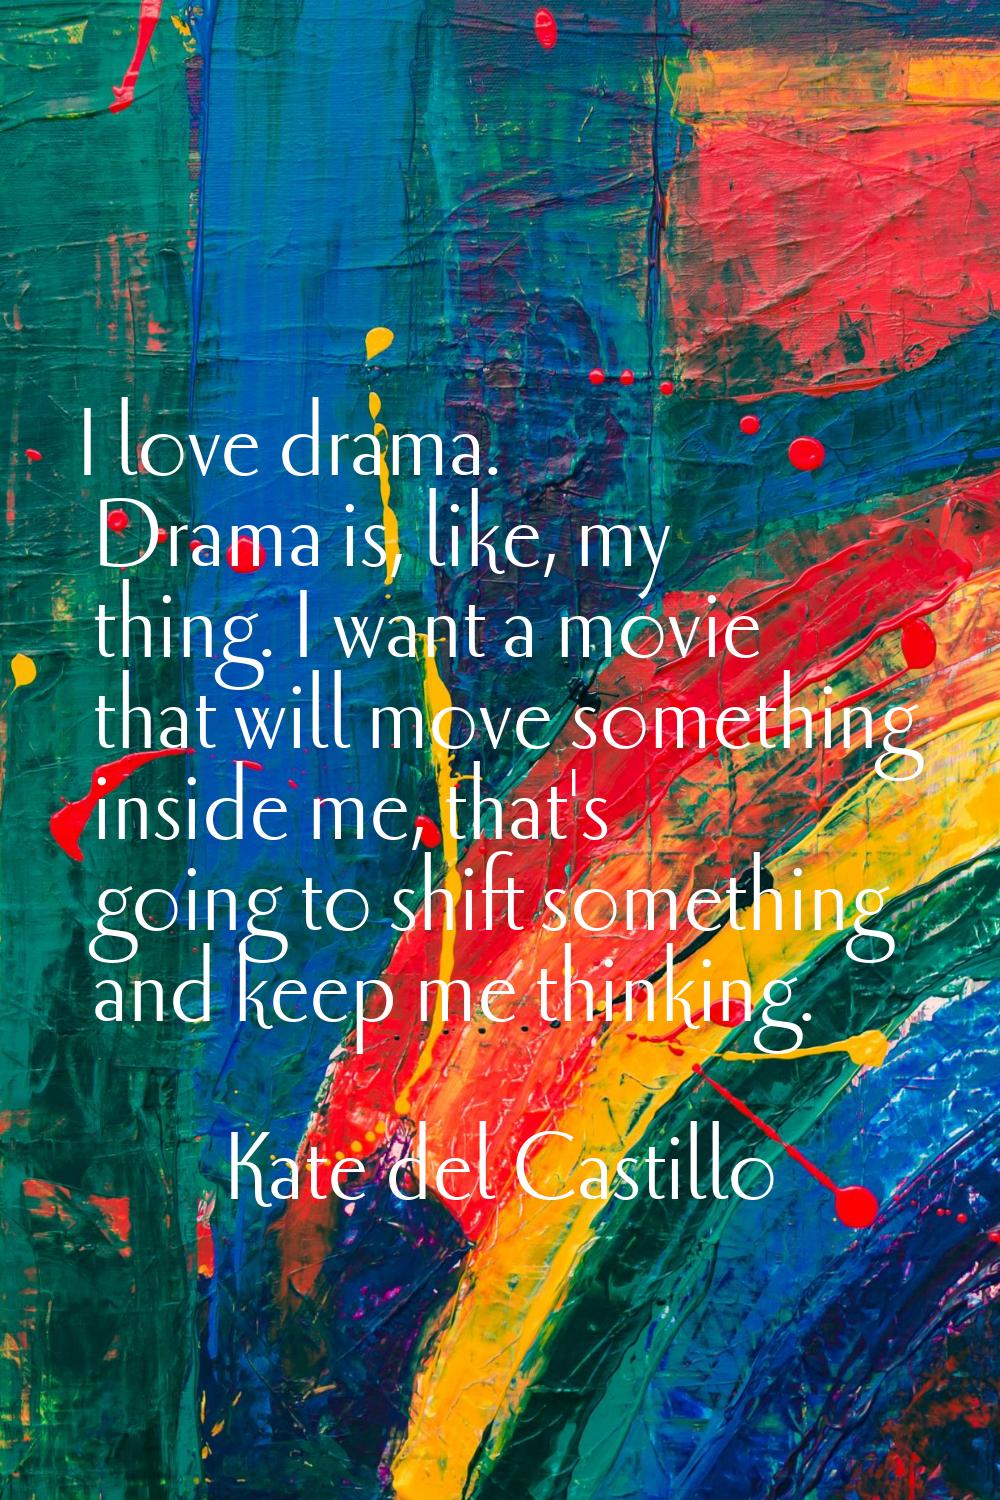 I love drama. Drama is, like, my thing. I want a movie that will move something inside me, that's g